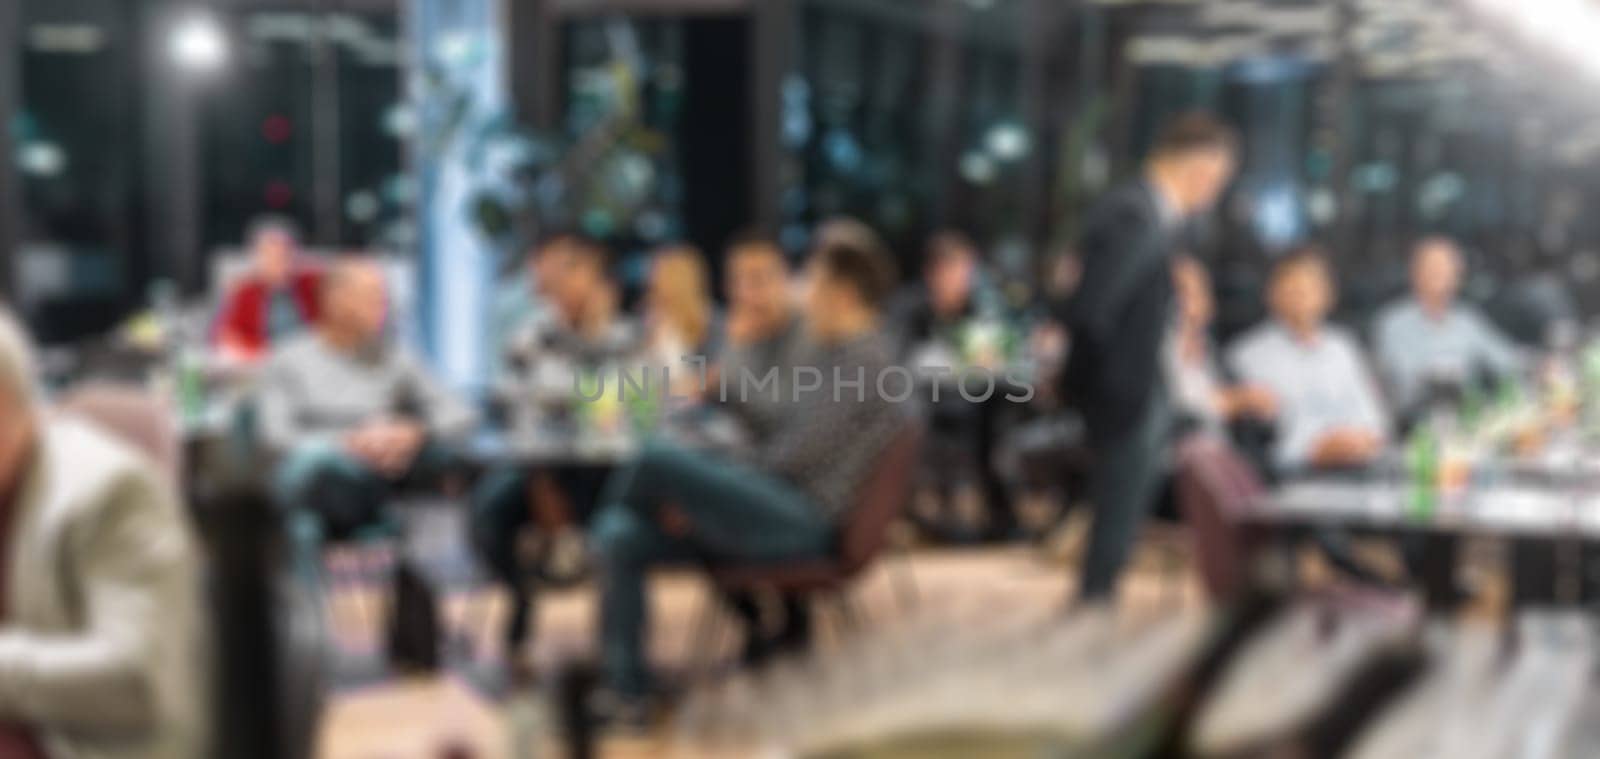 Blurred image of businesspeople at banquet business meeting event. Business and entrepreneurship events concept by kasto